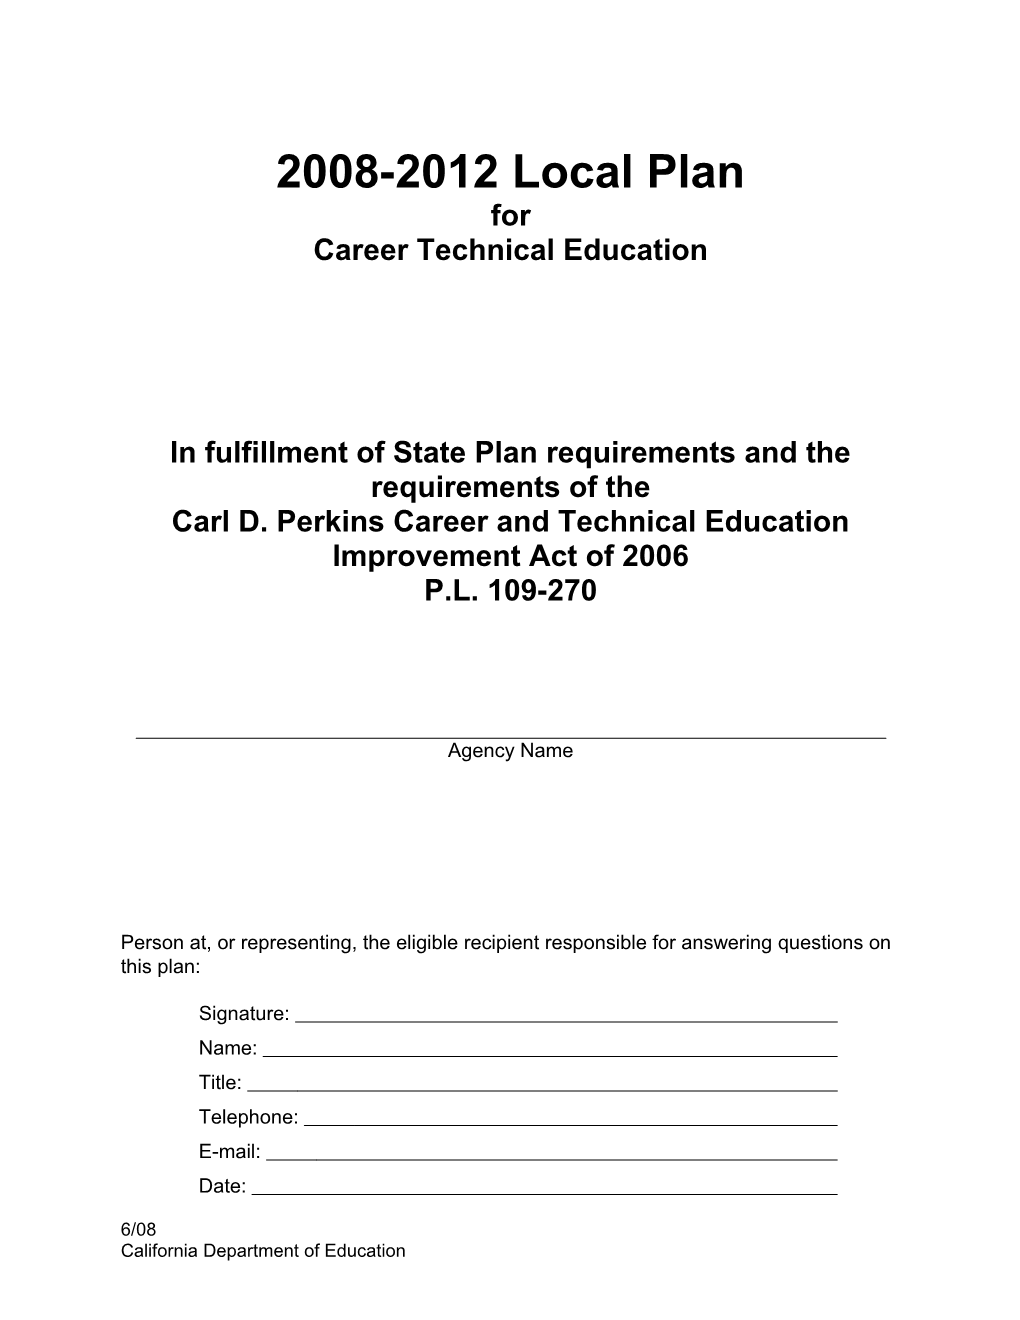 Local Plan Forms - Perkins (CA Dept Of Education)